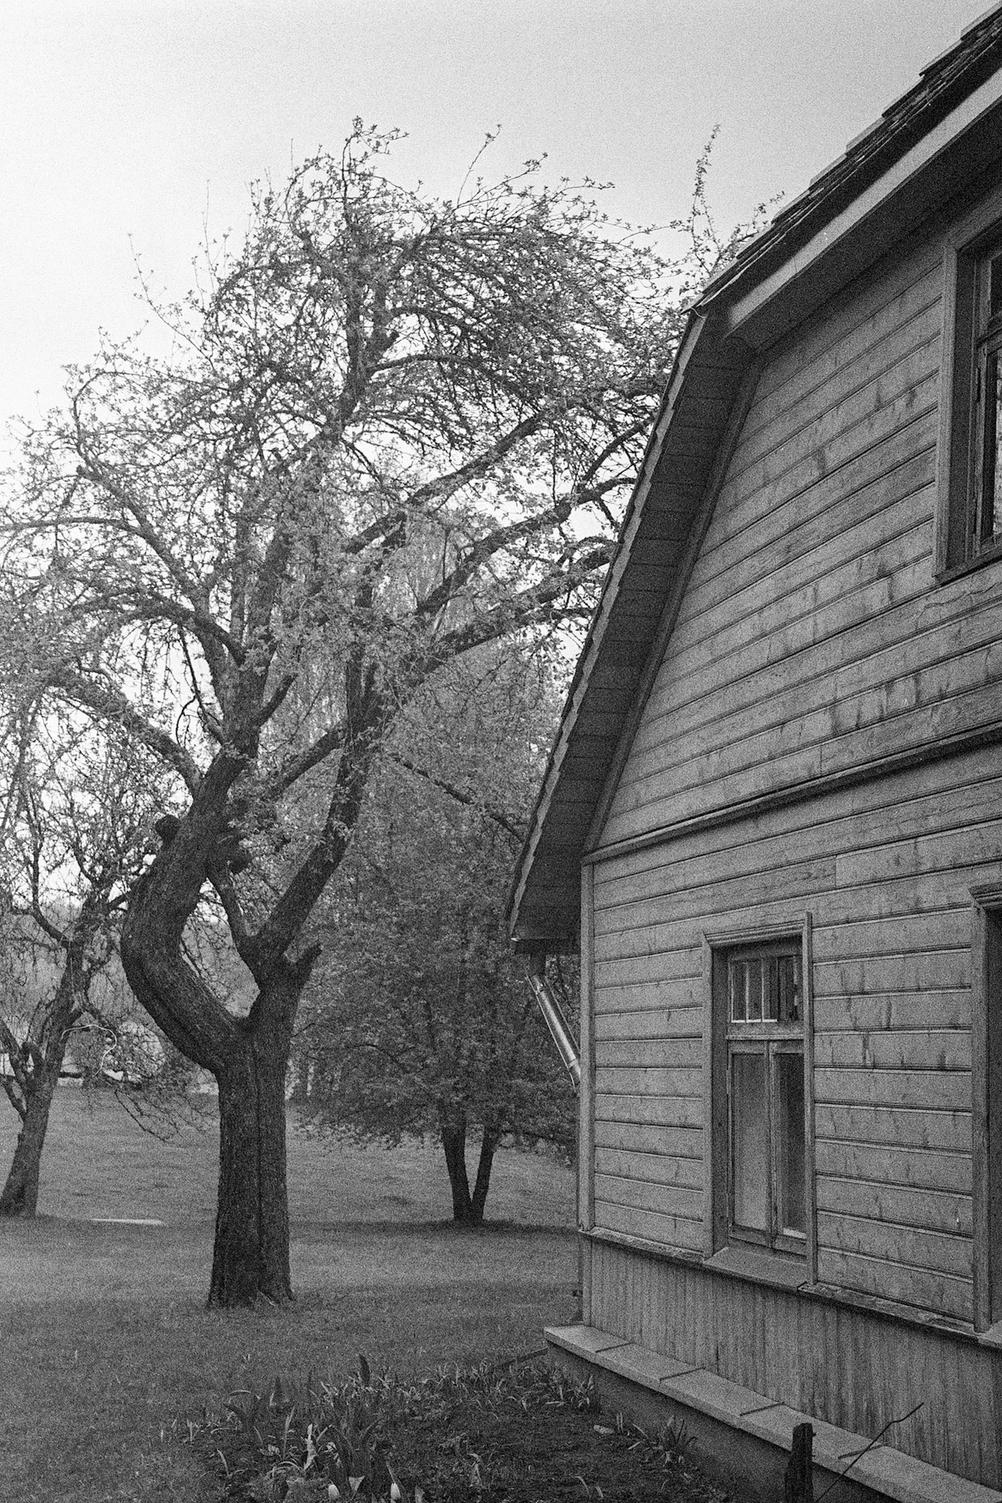 Photo of a house and a tree next to it.